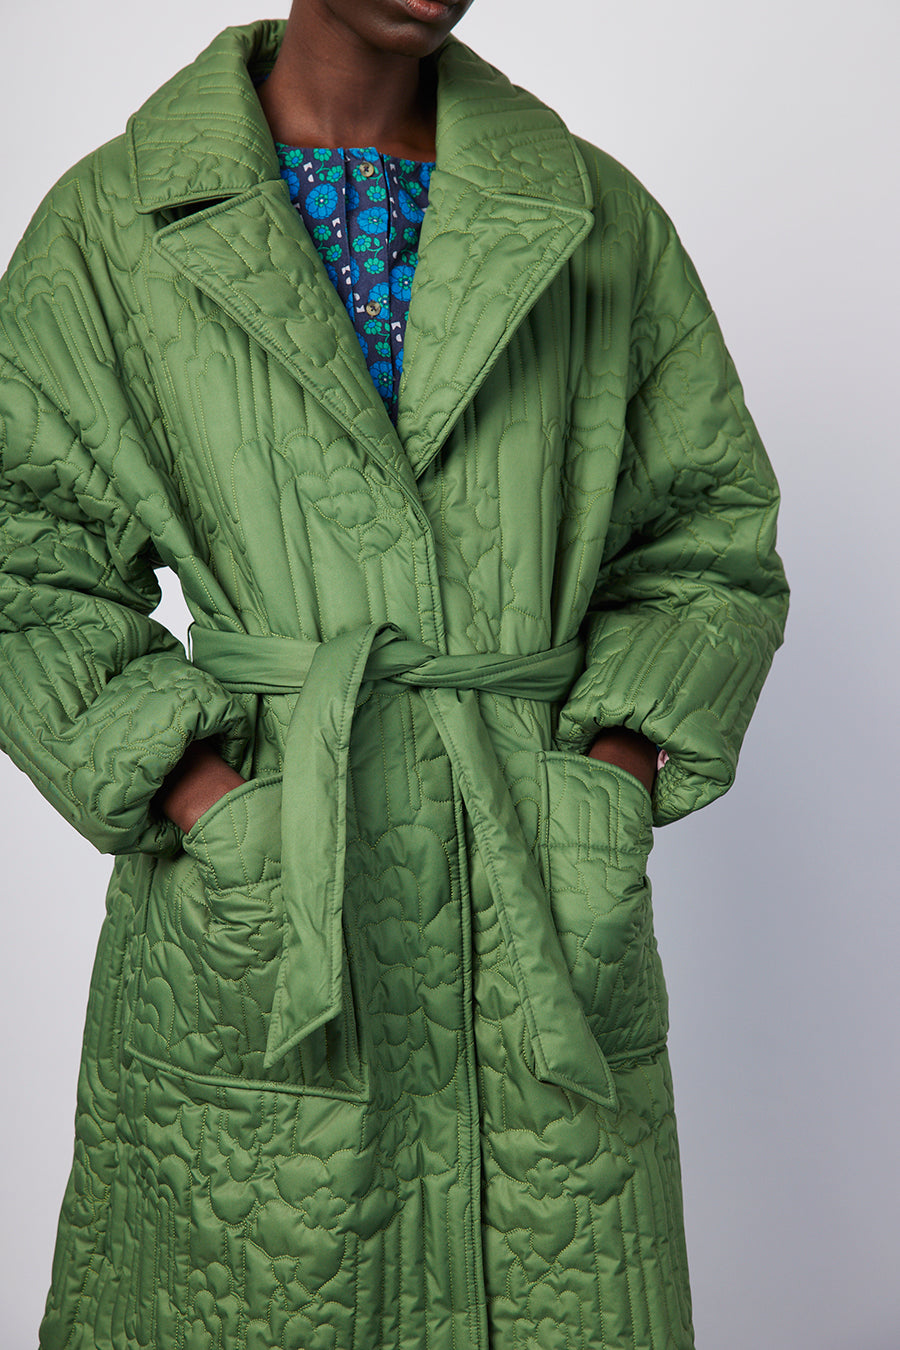 Coats | Quilted, Wrap & Puffer Jackets | Damson Madder